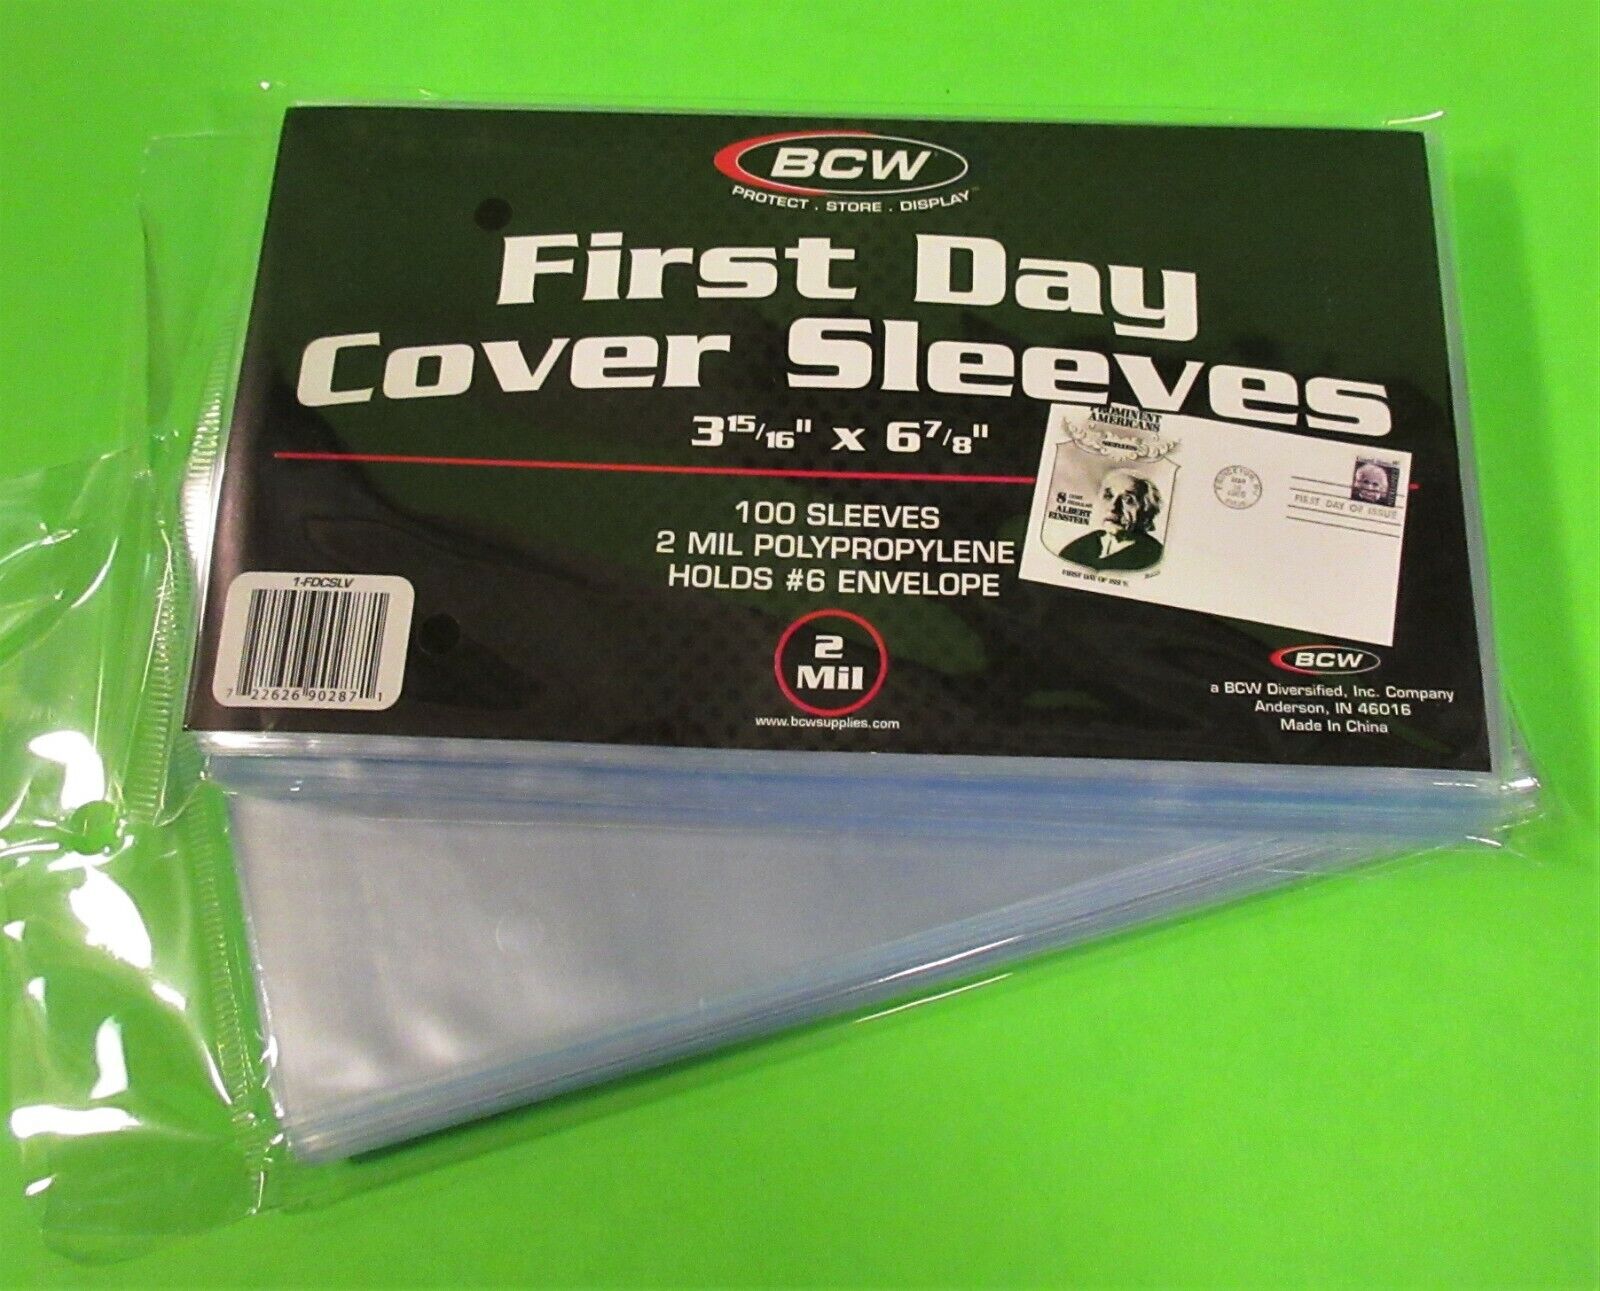 100 FIRST DAY COVER POLY SLEEVES, FOR #6 COVERS, 2 MIL CRYSTAL CLEAR - BCW BRAND BCW 1-FDCSLV - фотография #2